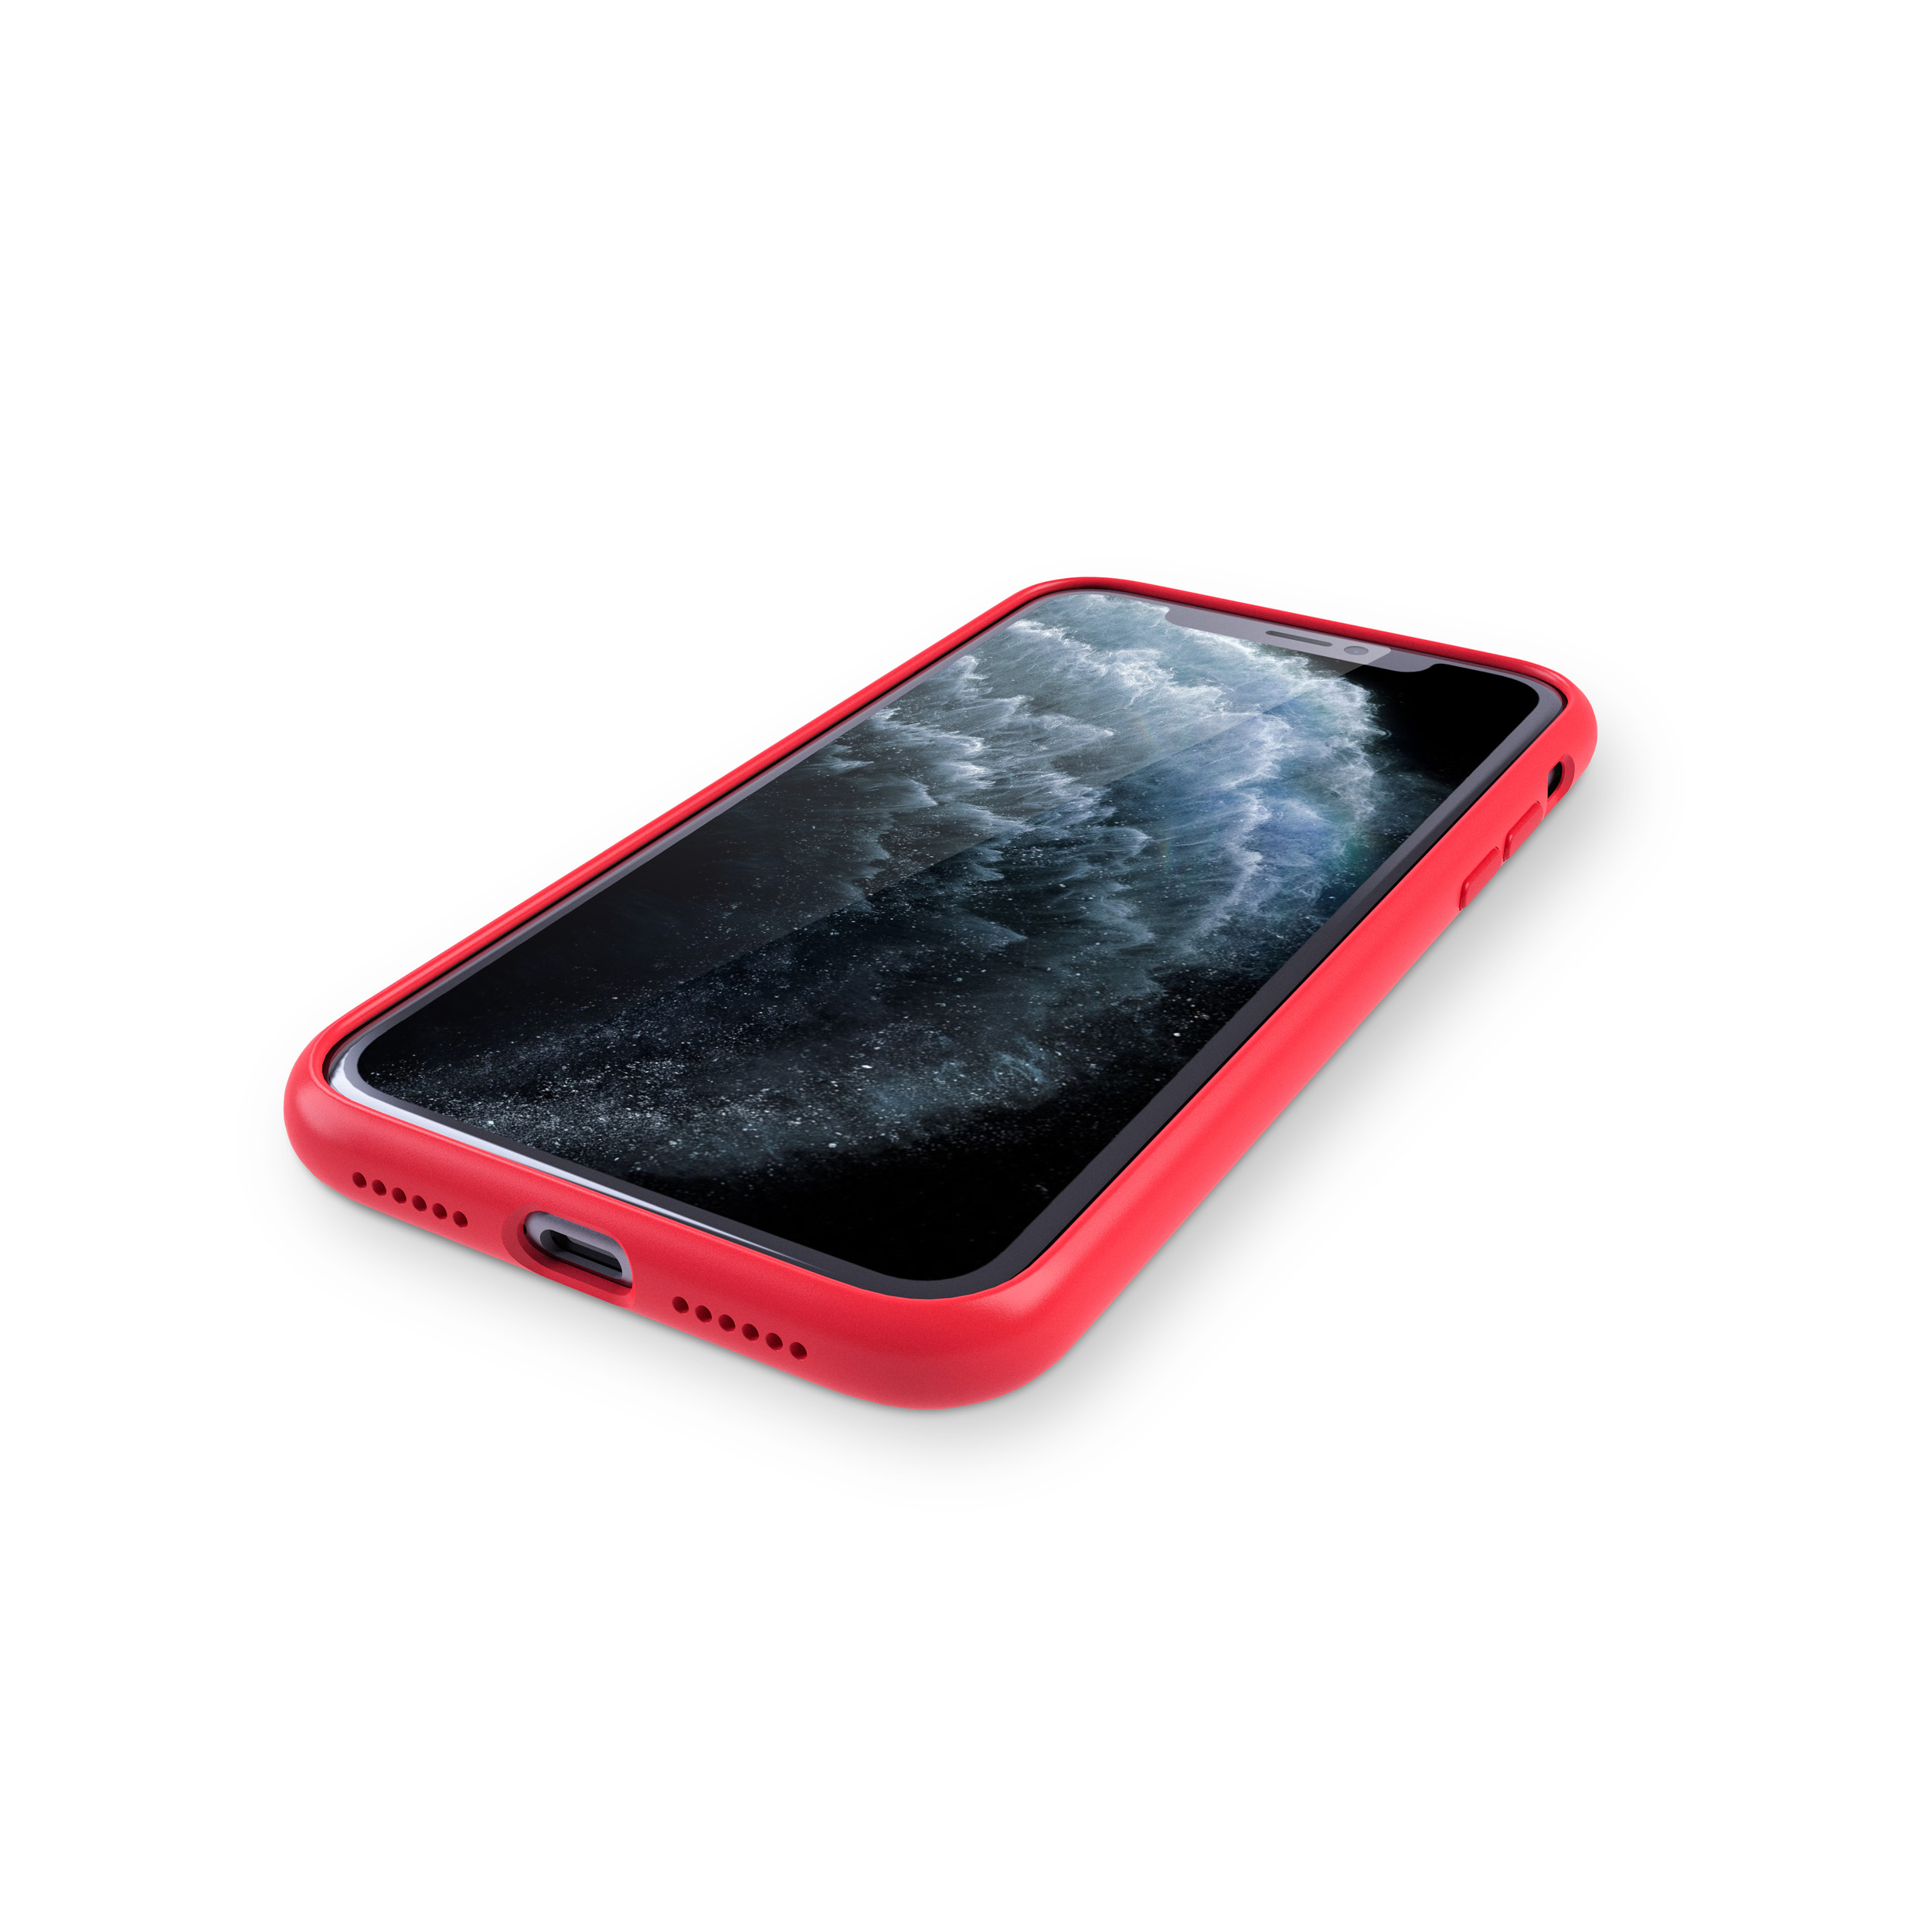 KMP Silikon Schutzhülle für 11 iPhone iPhone red Red, Pro, Backcover, Apple, 11 Pro